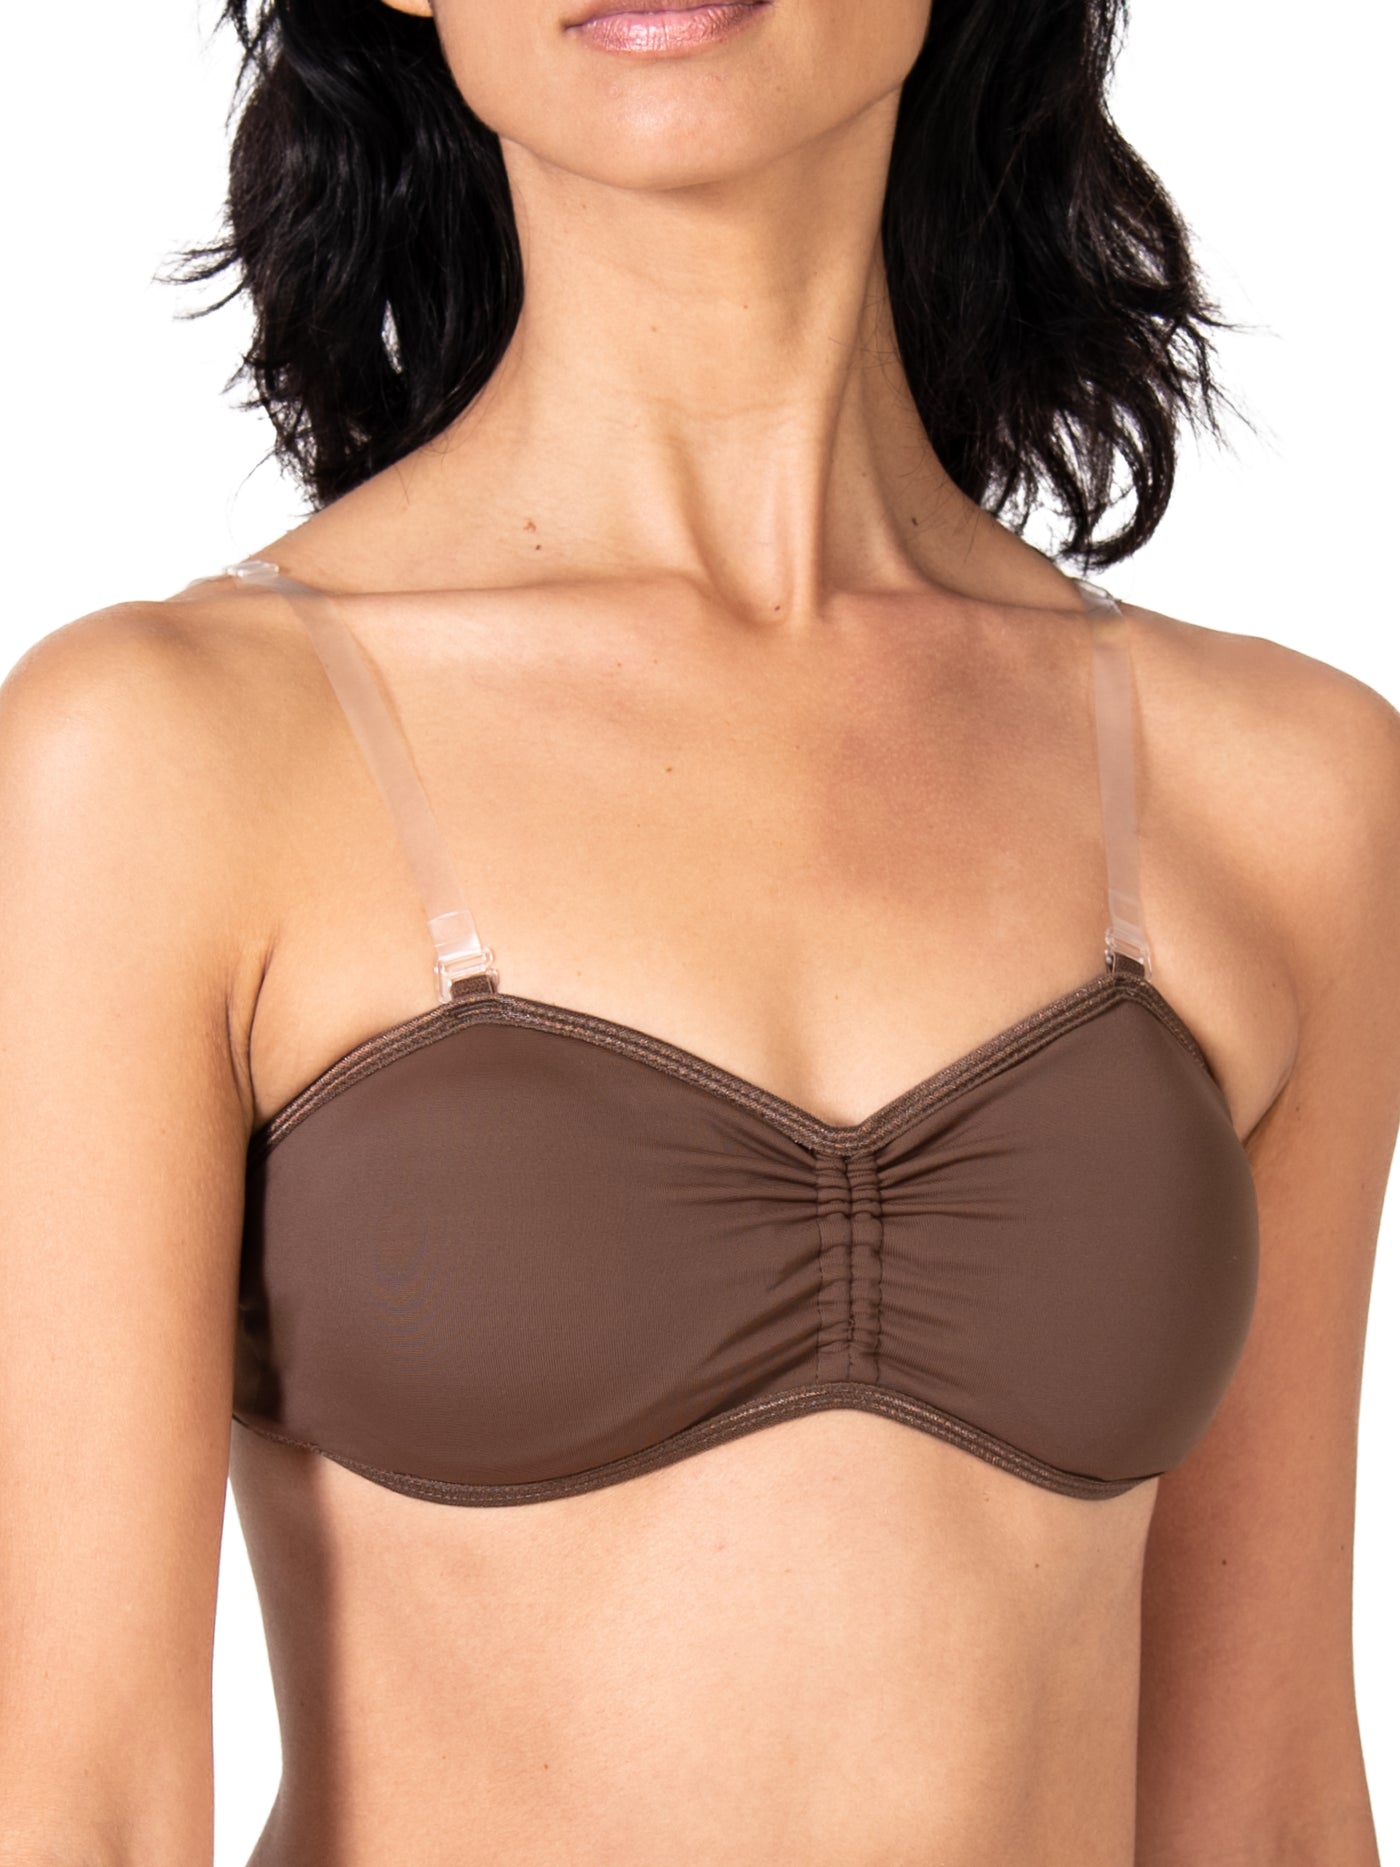 Body Wrappers Padded Bandeau Bra with Adjustable Straps and Clear Back 274  : Dance Max Dancewear